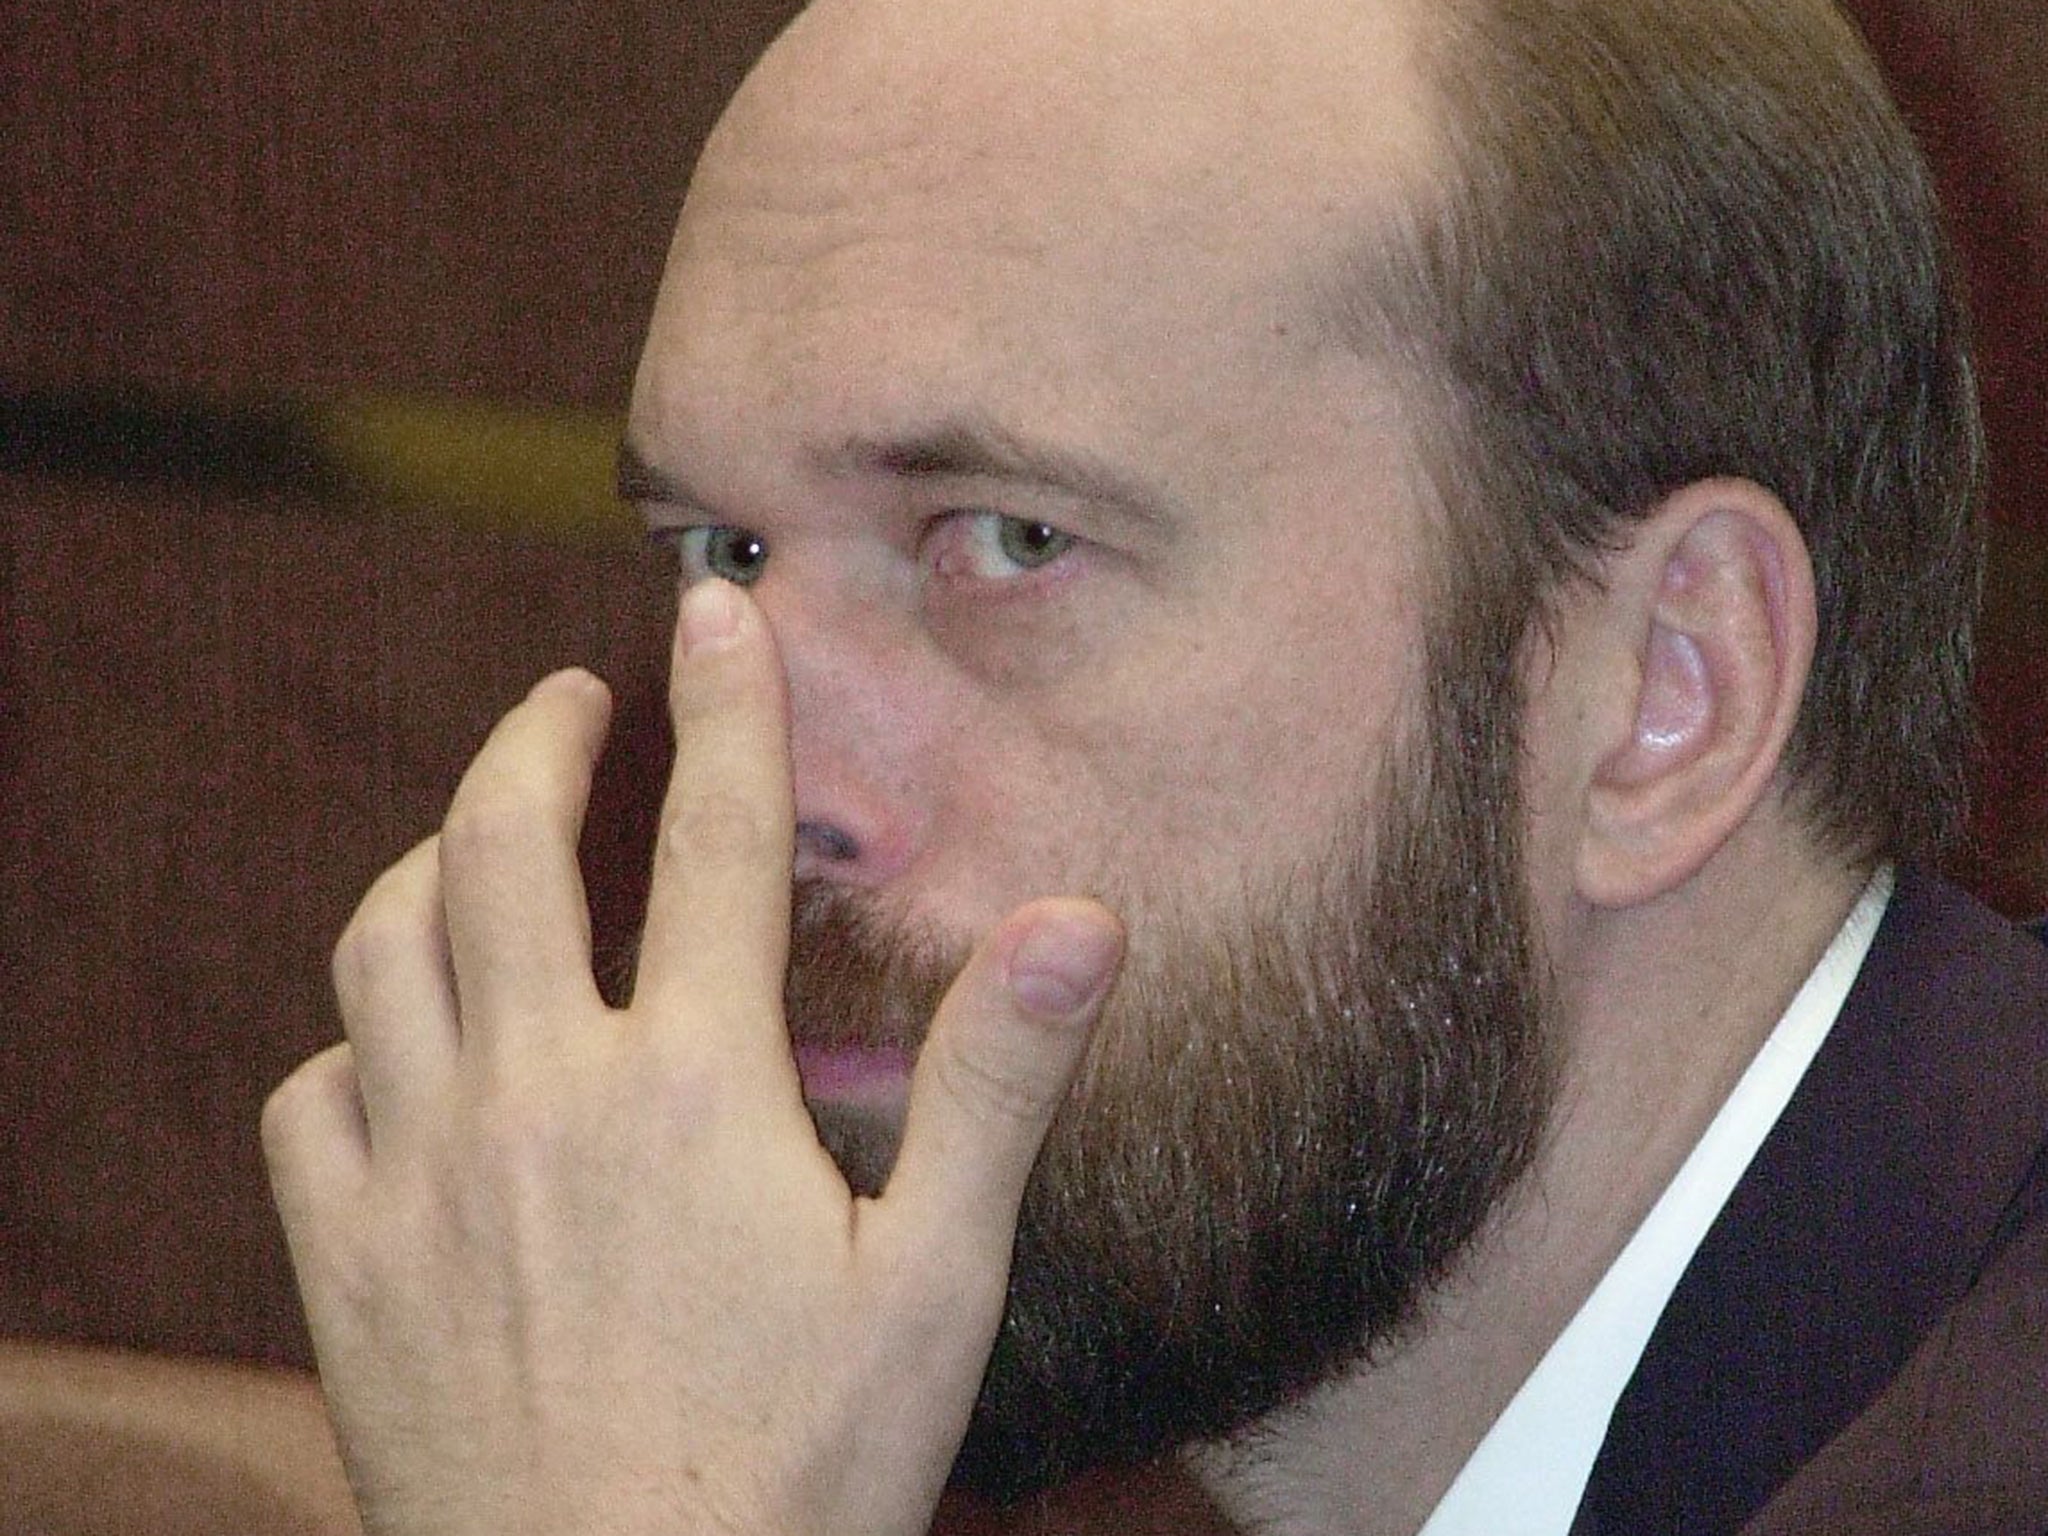 Sergei Pugachev is alleged to have stolen money awarded to his bank in Russia